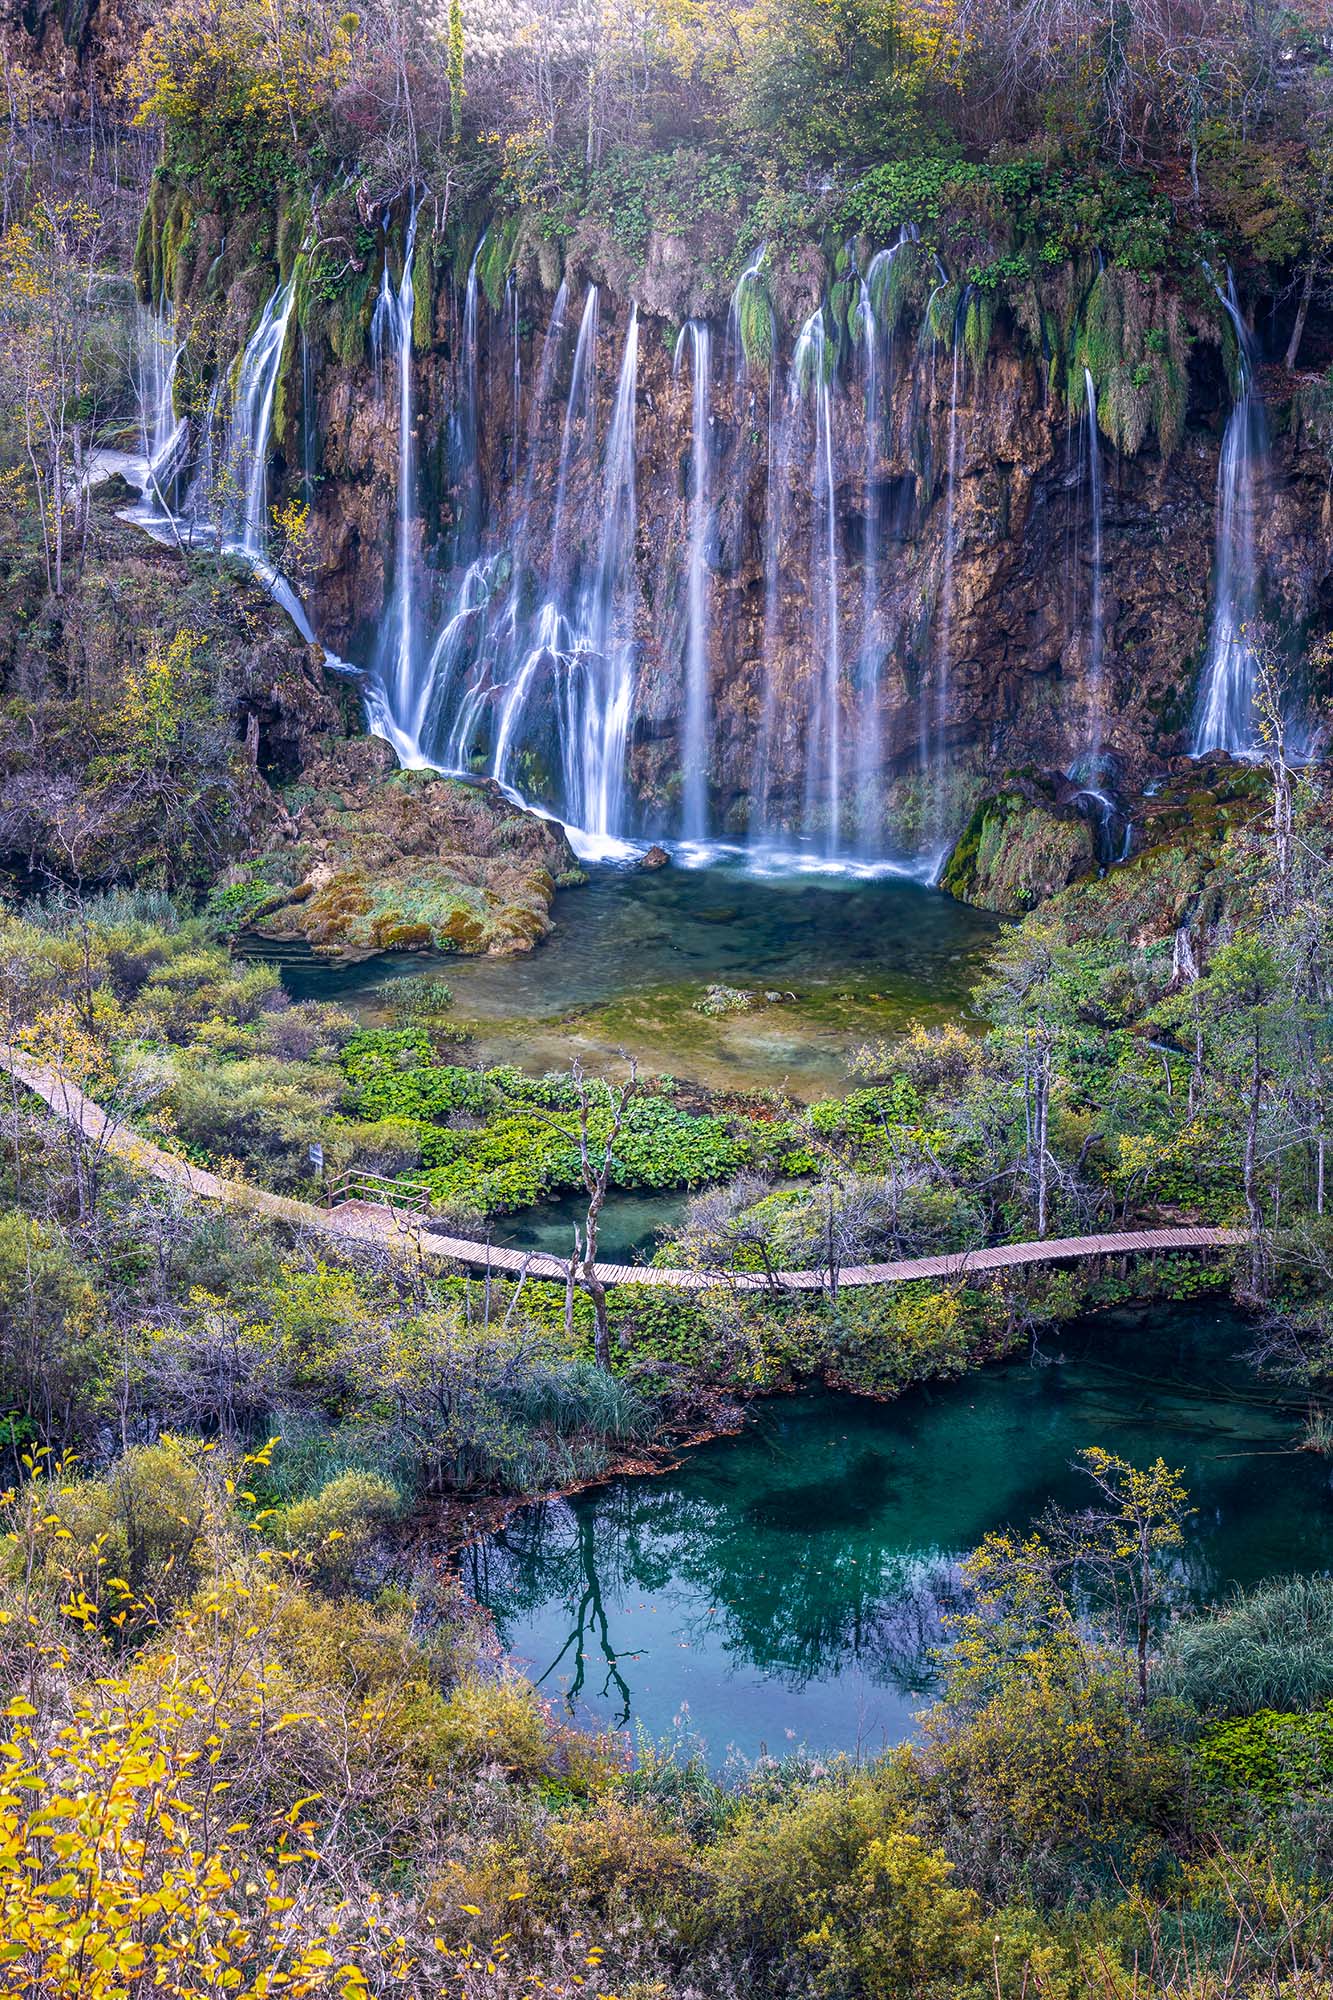 "Autumnal Cascades" presents a vertical snapshot captured during the vibrant fall season in Plitvice National Park, Croatia....